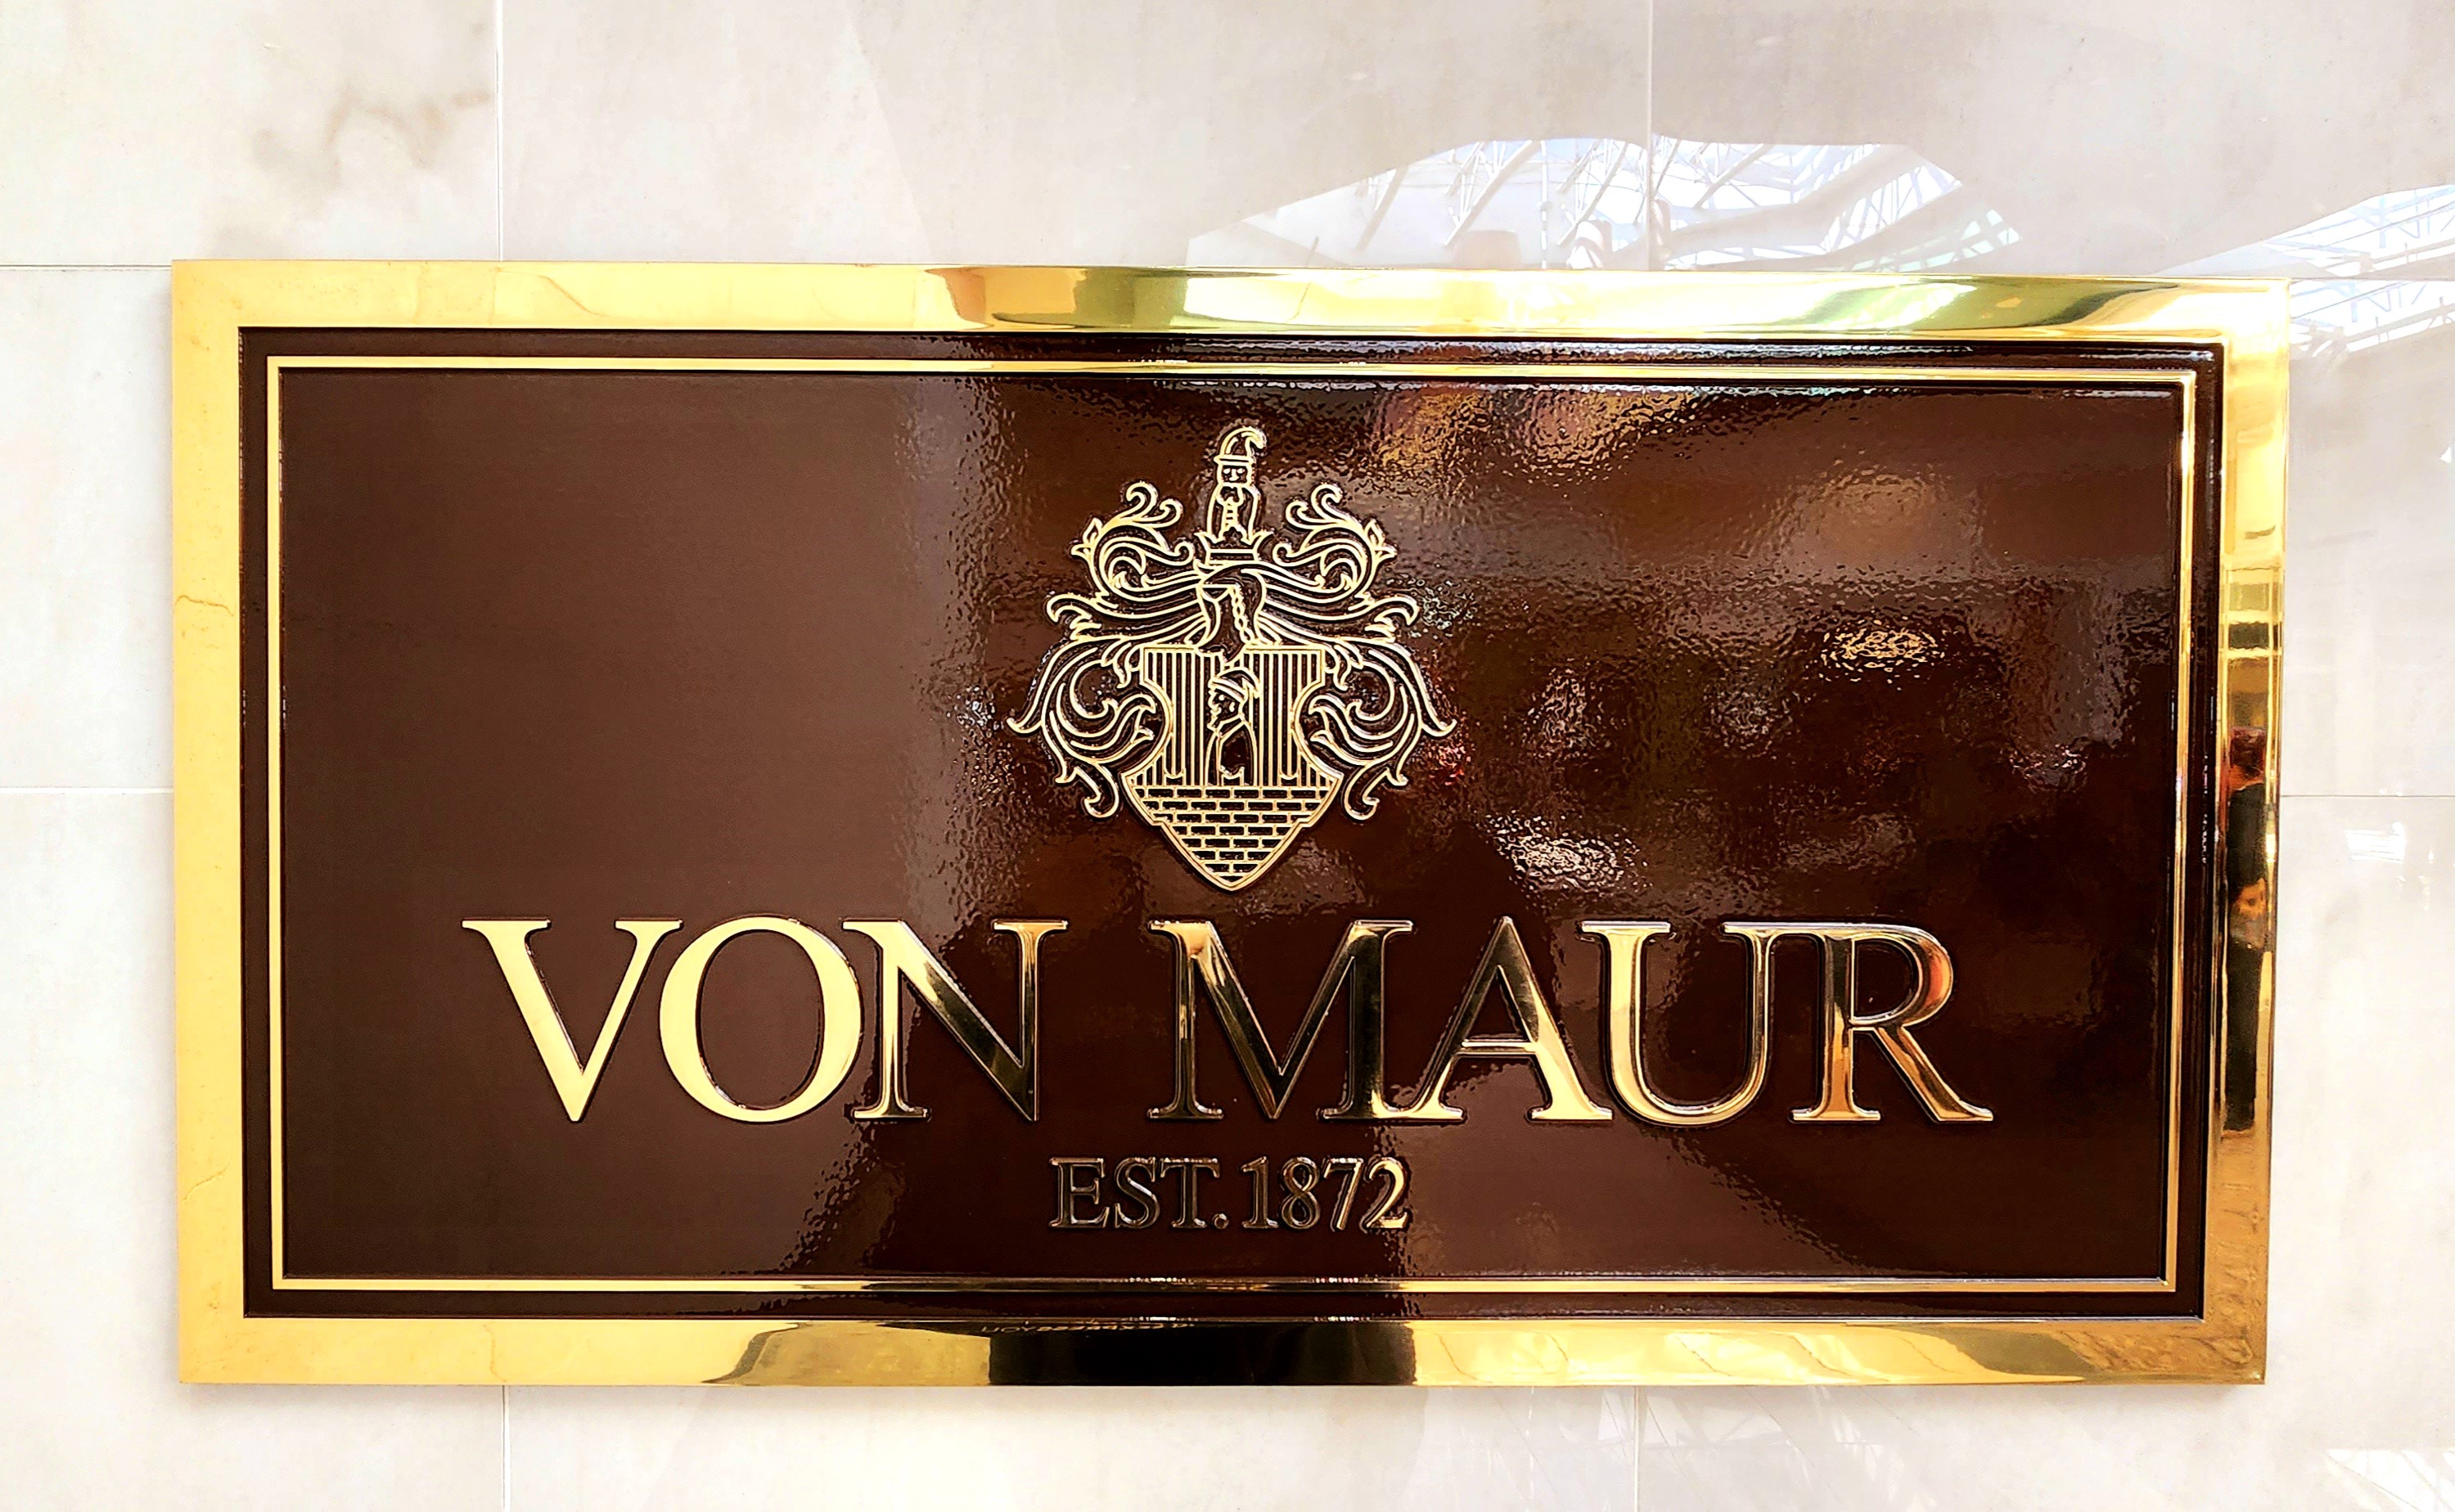 Von Maur to open second Wisconsin store at former Madison Boston Store